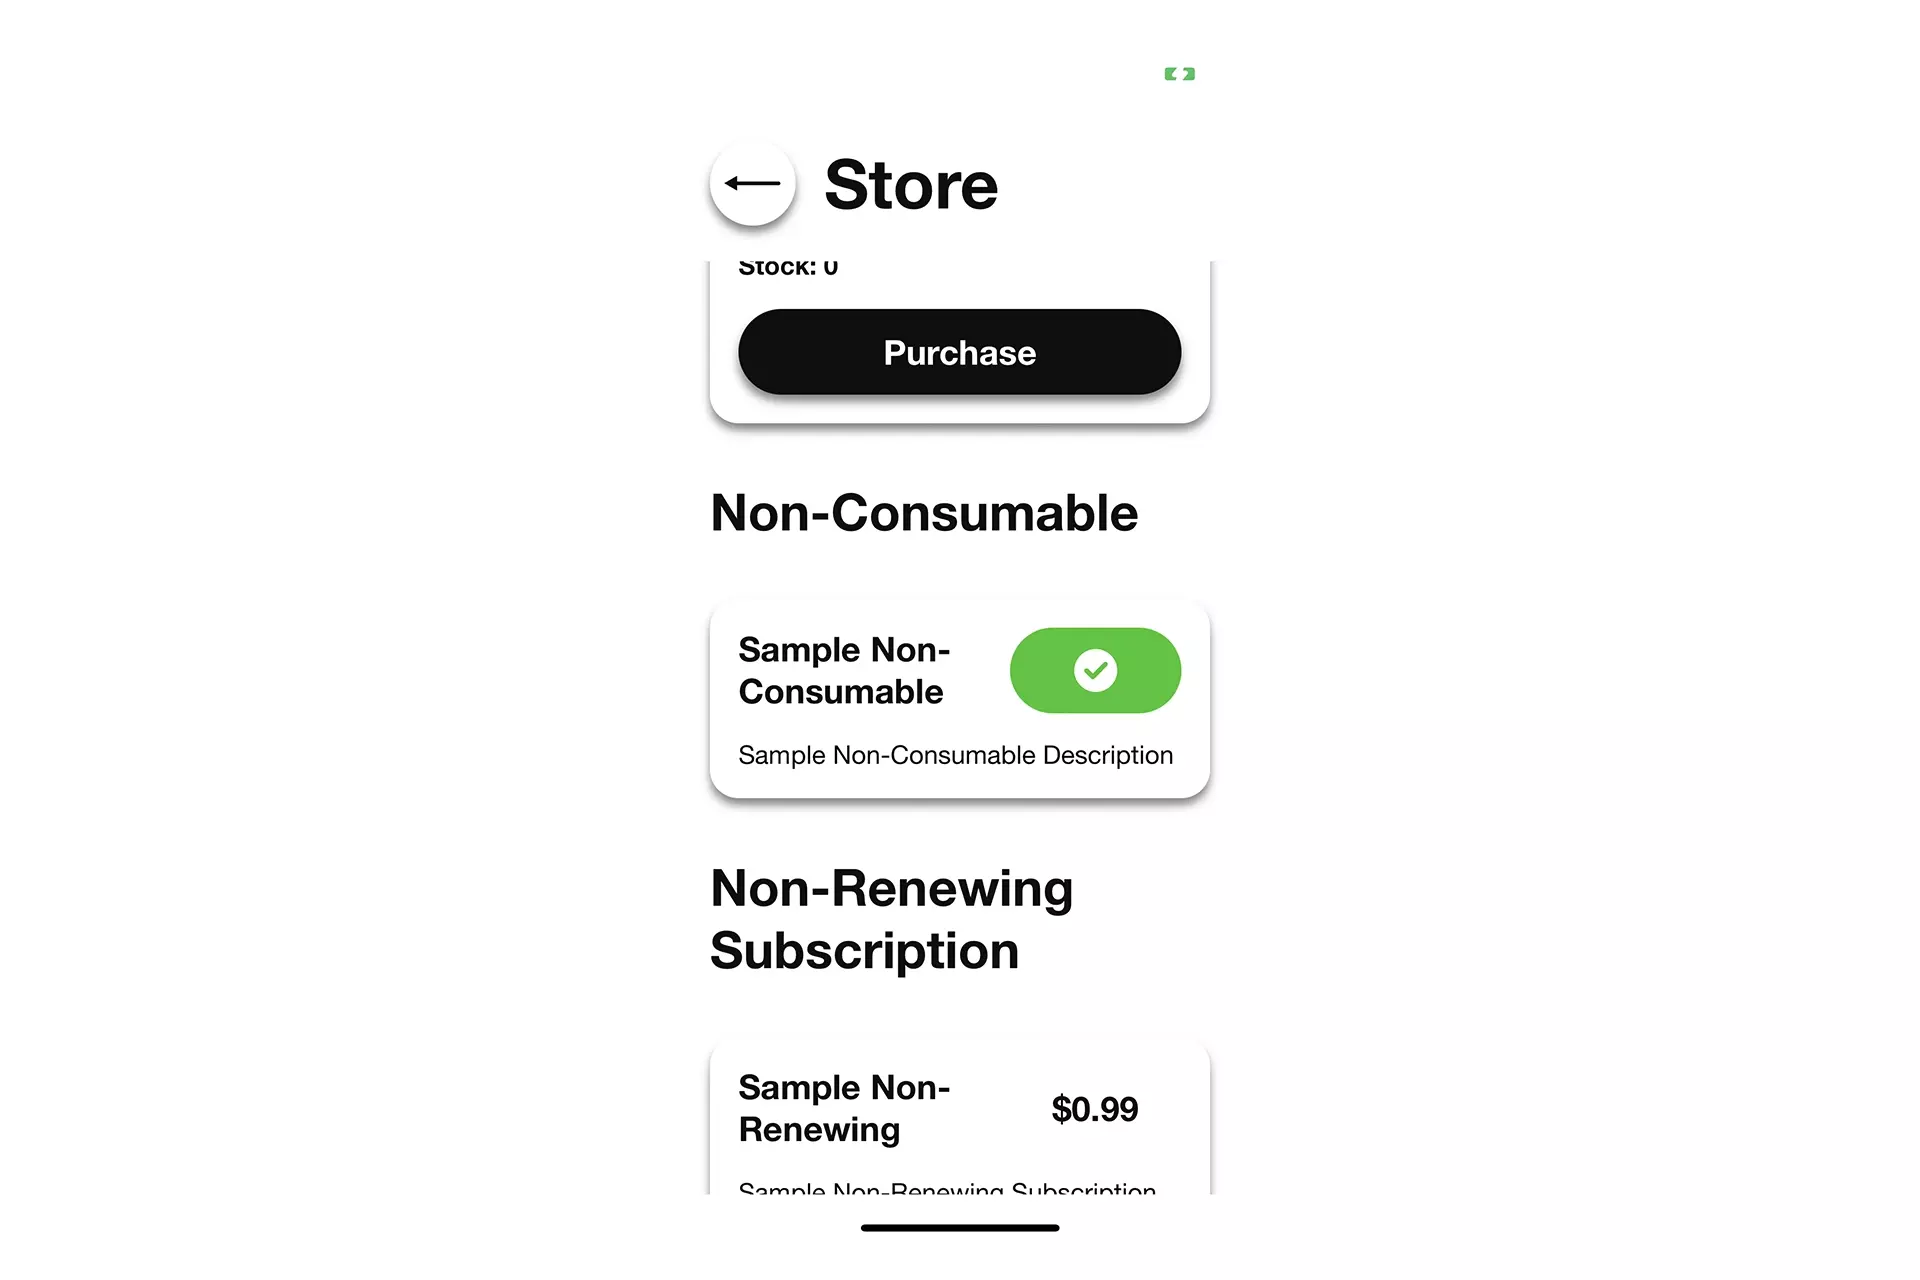 A screenshot of an iOS app showing a non-consumable in-app purchase in a purchased state.